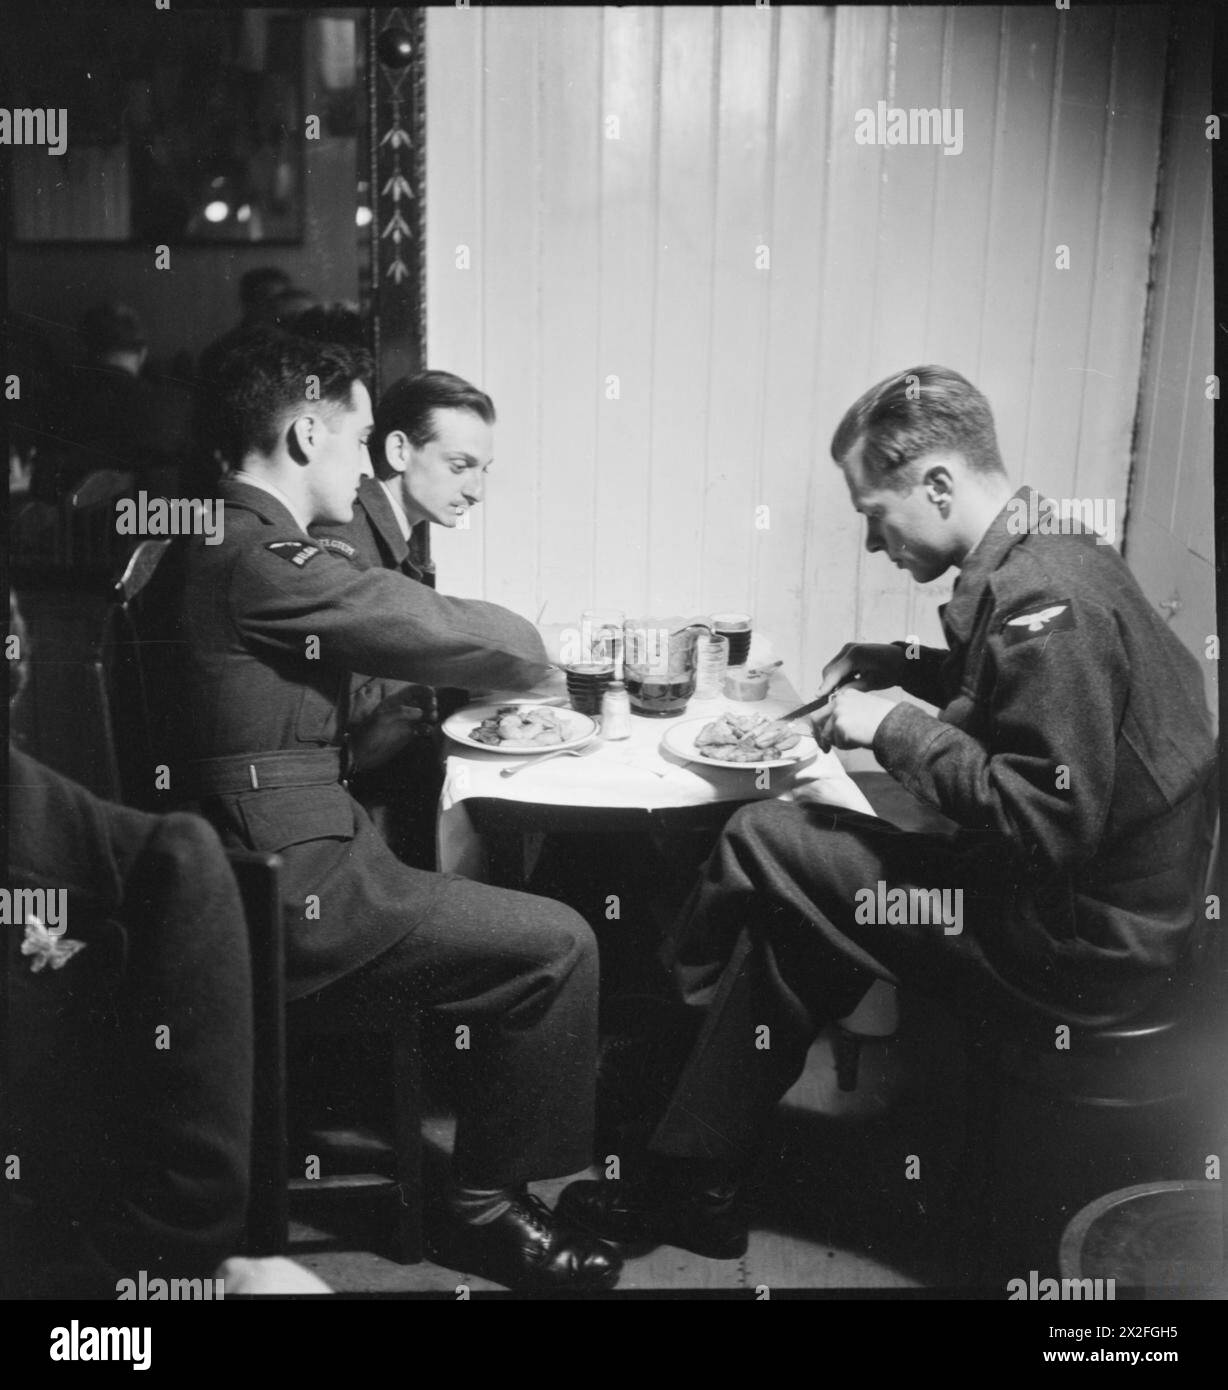 BELGIAN CLUBS AND CAFES IN LONDON: REST, RELAXATION AND ENTERTAINMENT, LONDON, ENGLAND, UK, 1945 - Three Belgian airmen enjoy a meal at a London restaurant called 'Chez Rose' Stock Photo